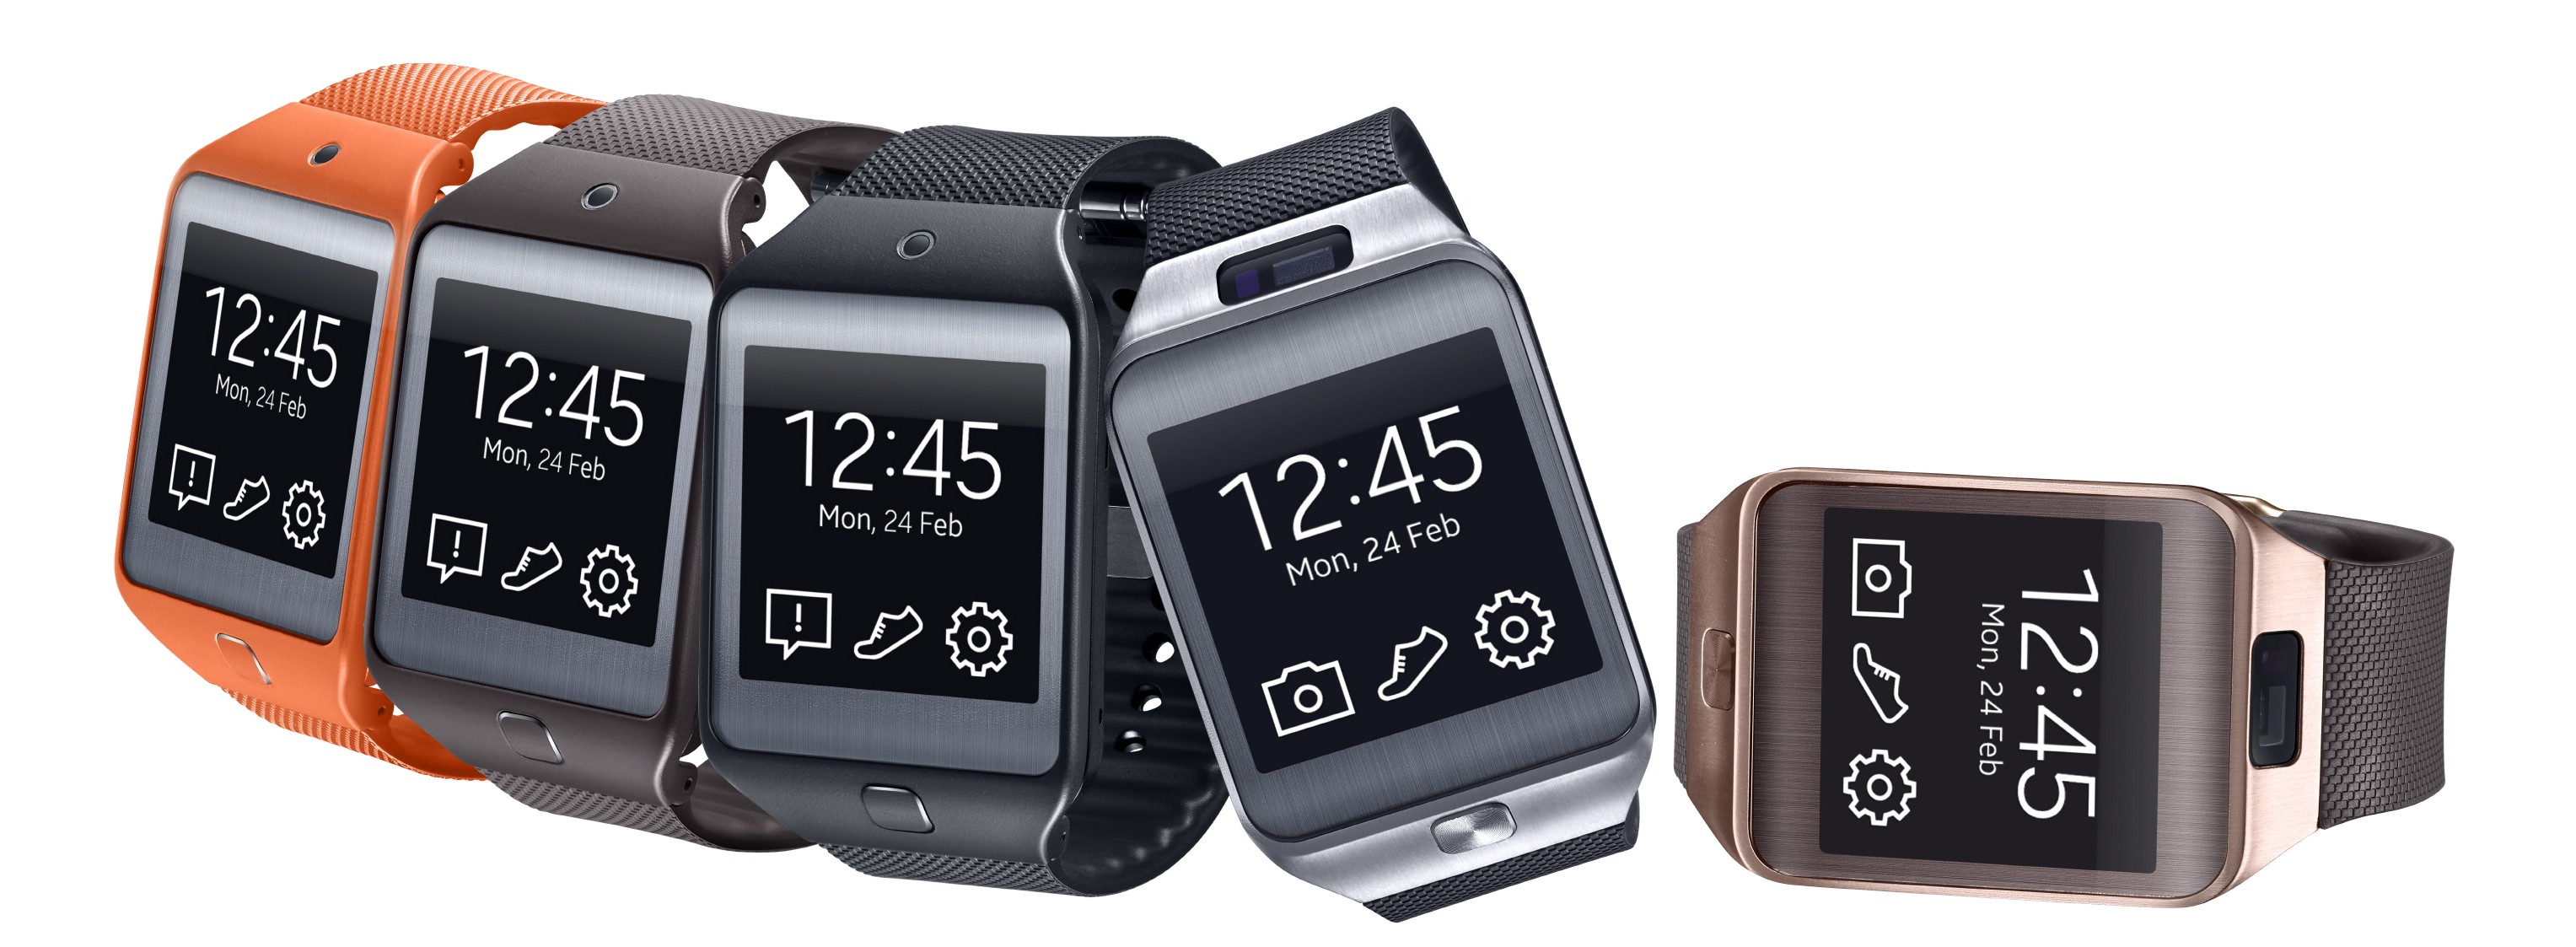 Samsung Gear 2, Gear 2 Neo and Gear Fit 